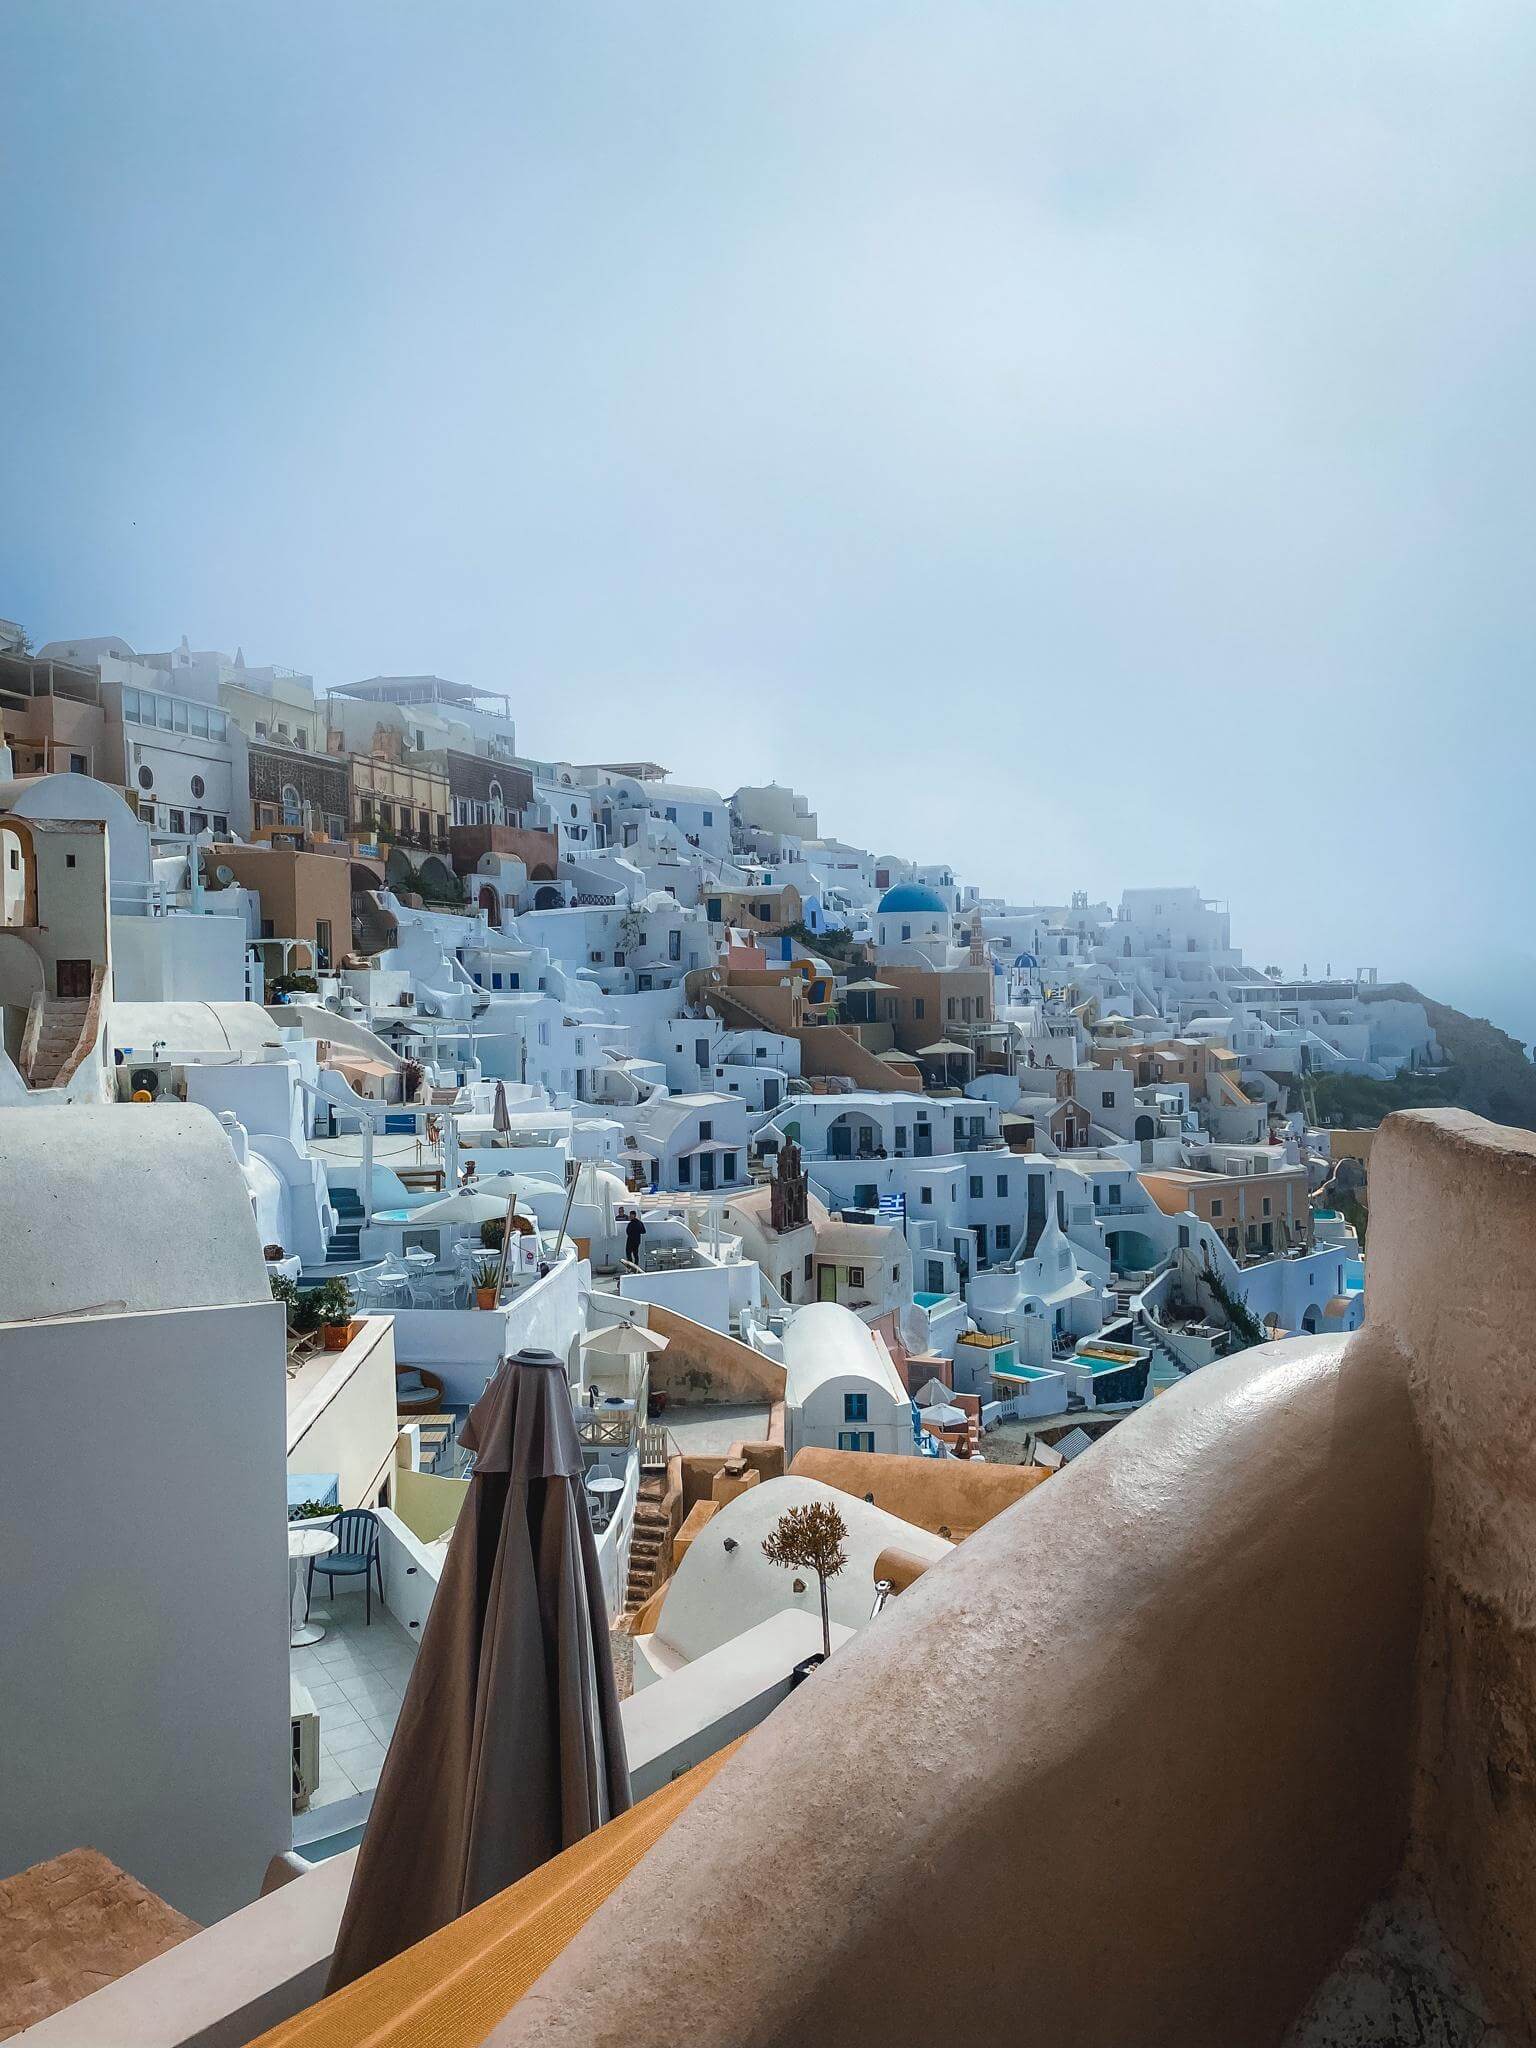 2 Days In Santorini: What To Do